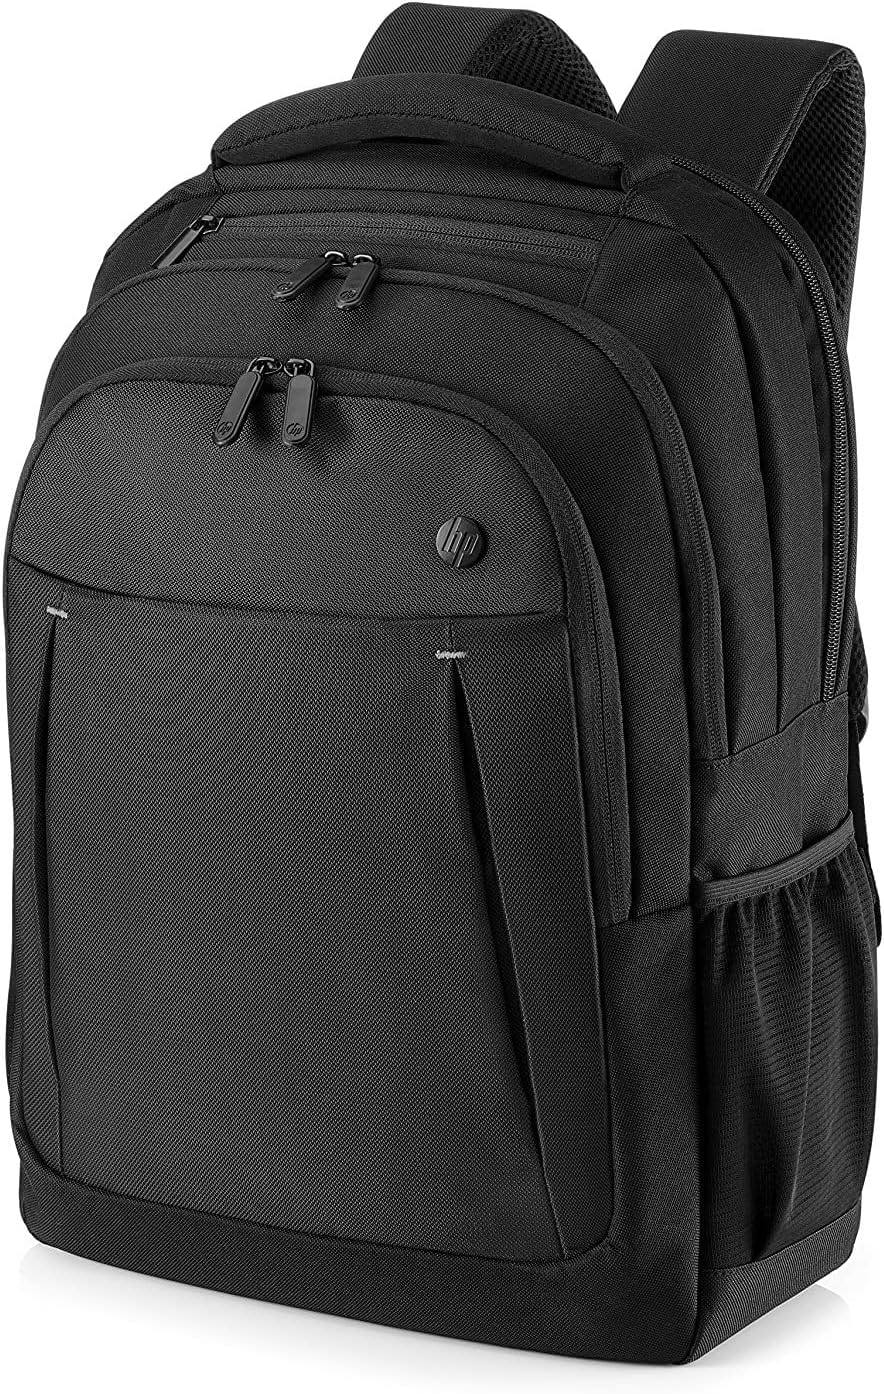 HP Business Backpack for 17.3 Notebooks in Black - Dimensions: 13 x 7.1 x 18.5 0191628882366